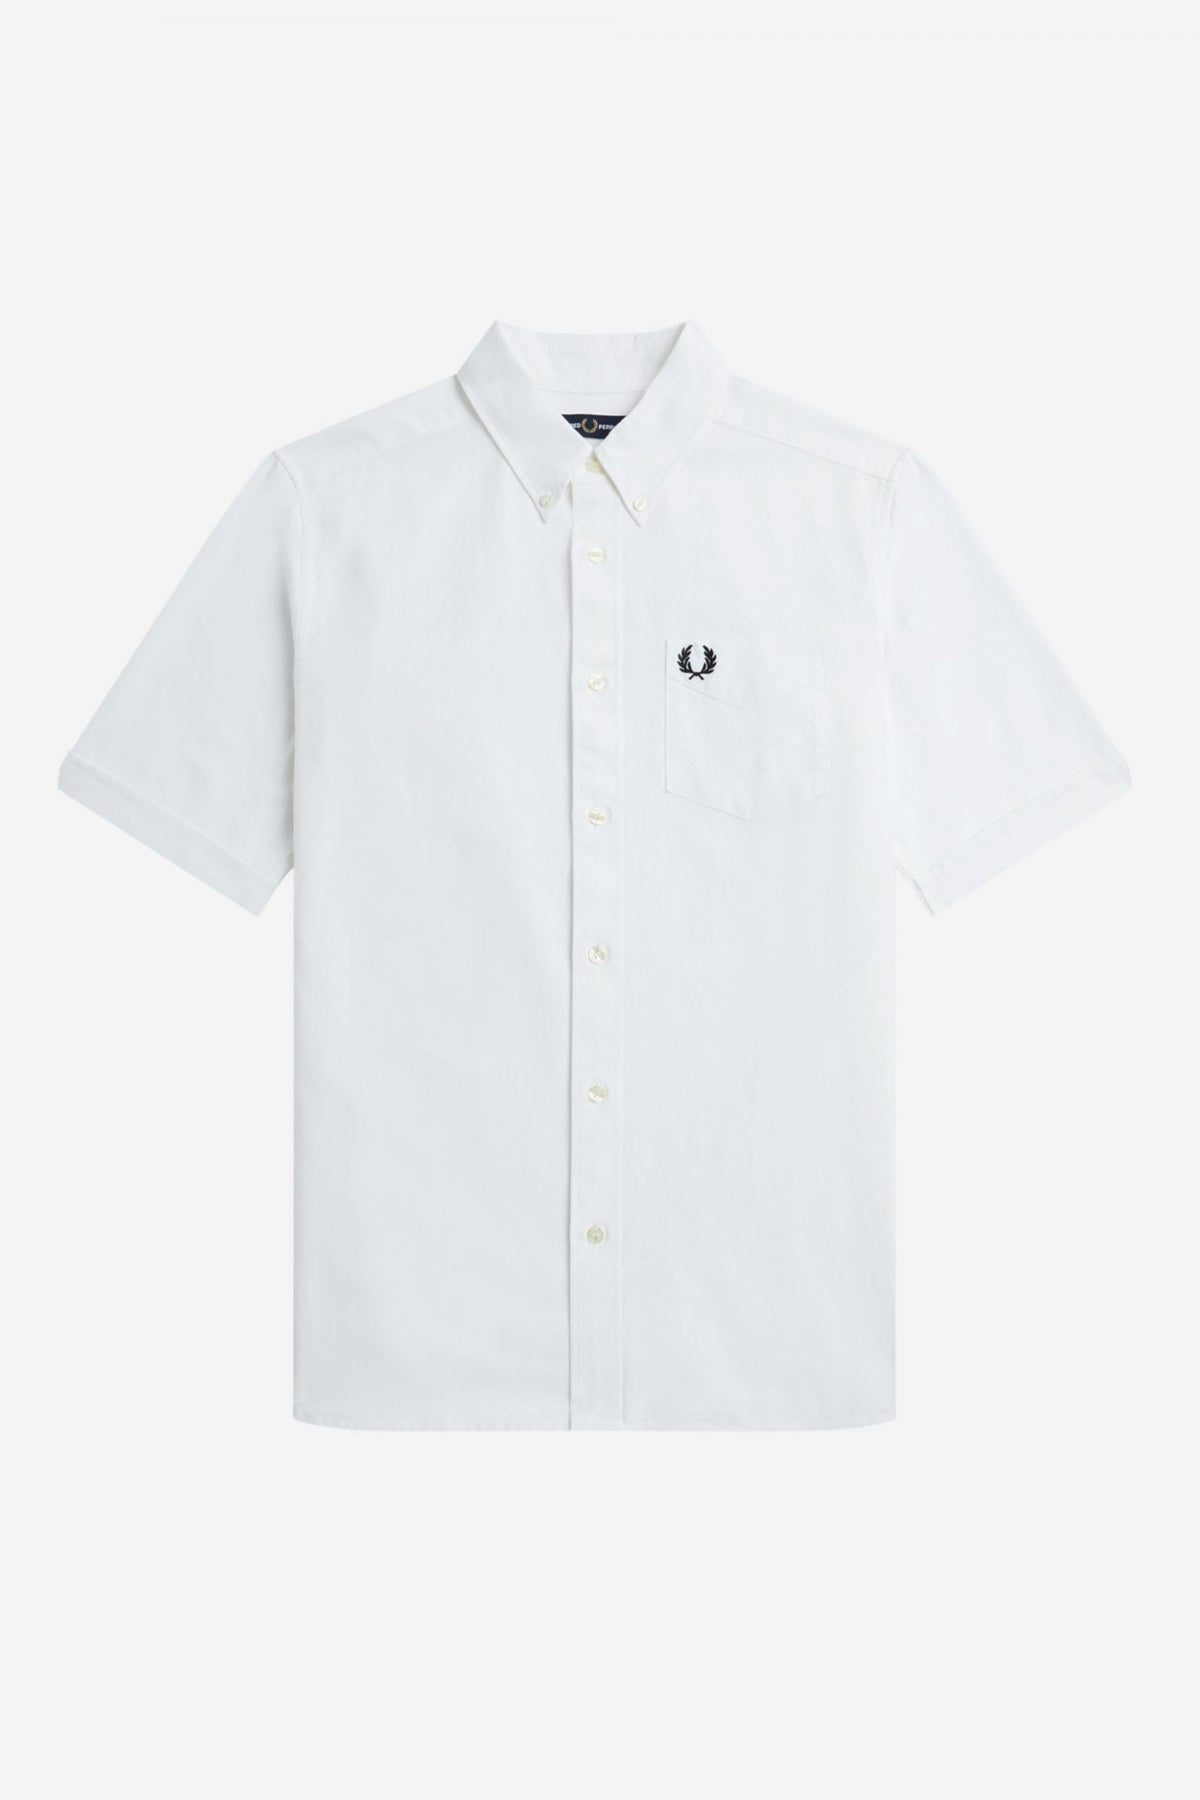 FRED PERRY OXFORD SHIRT en color BLANCO  (2)